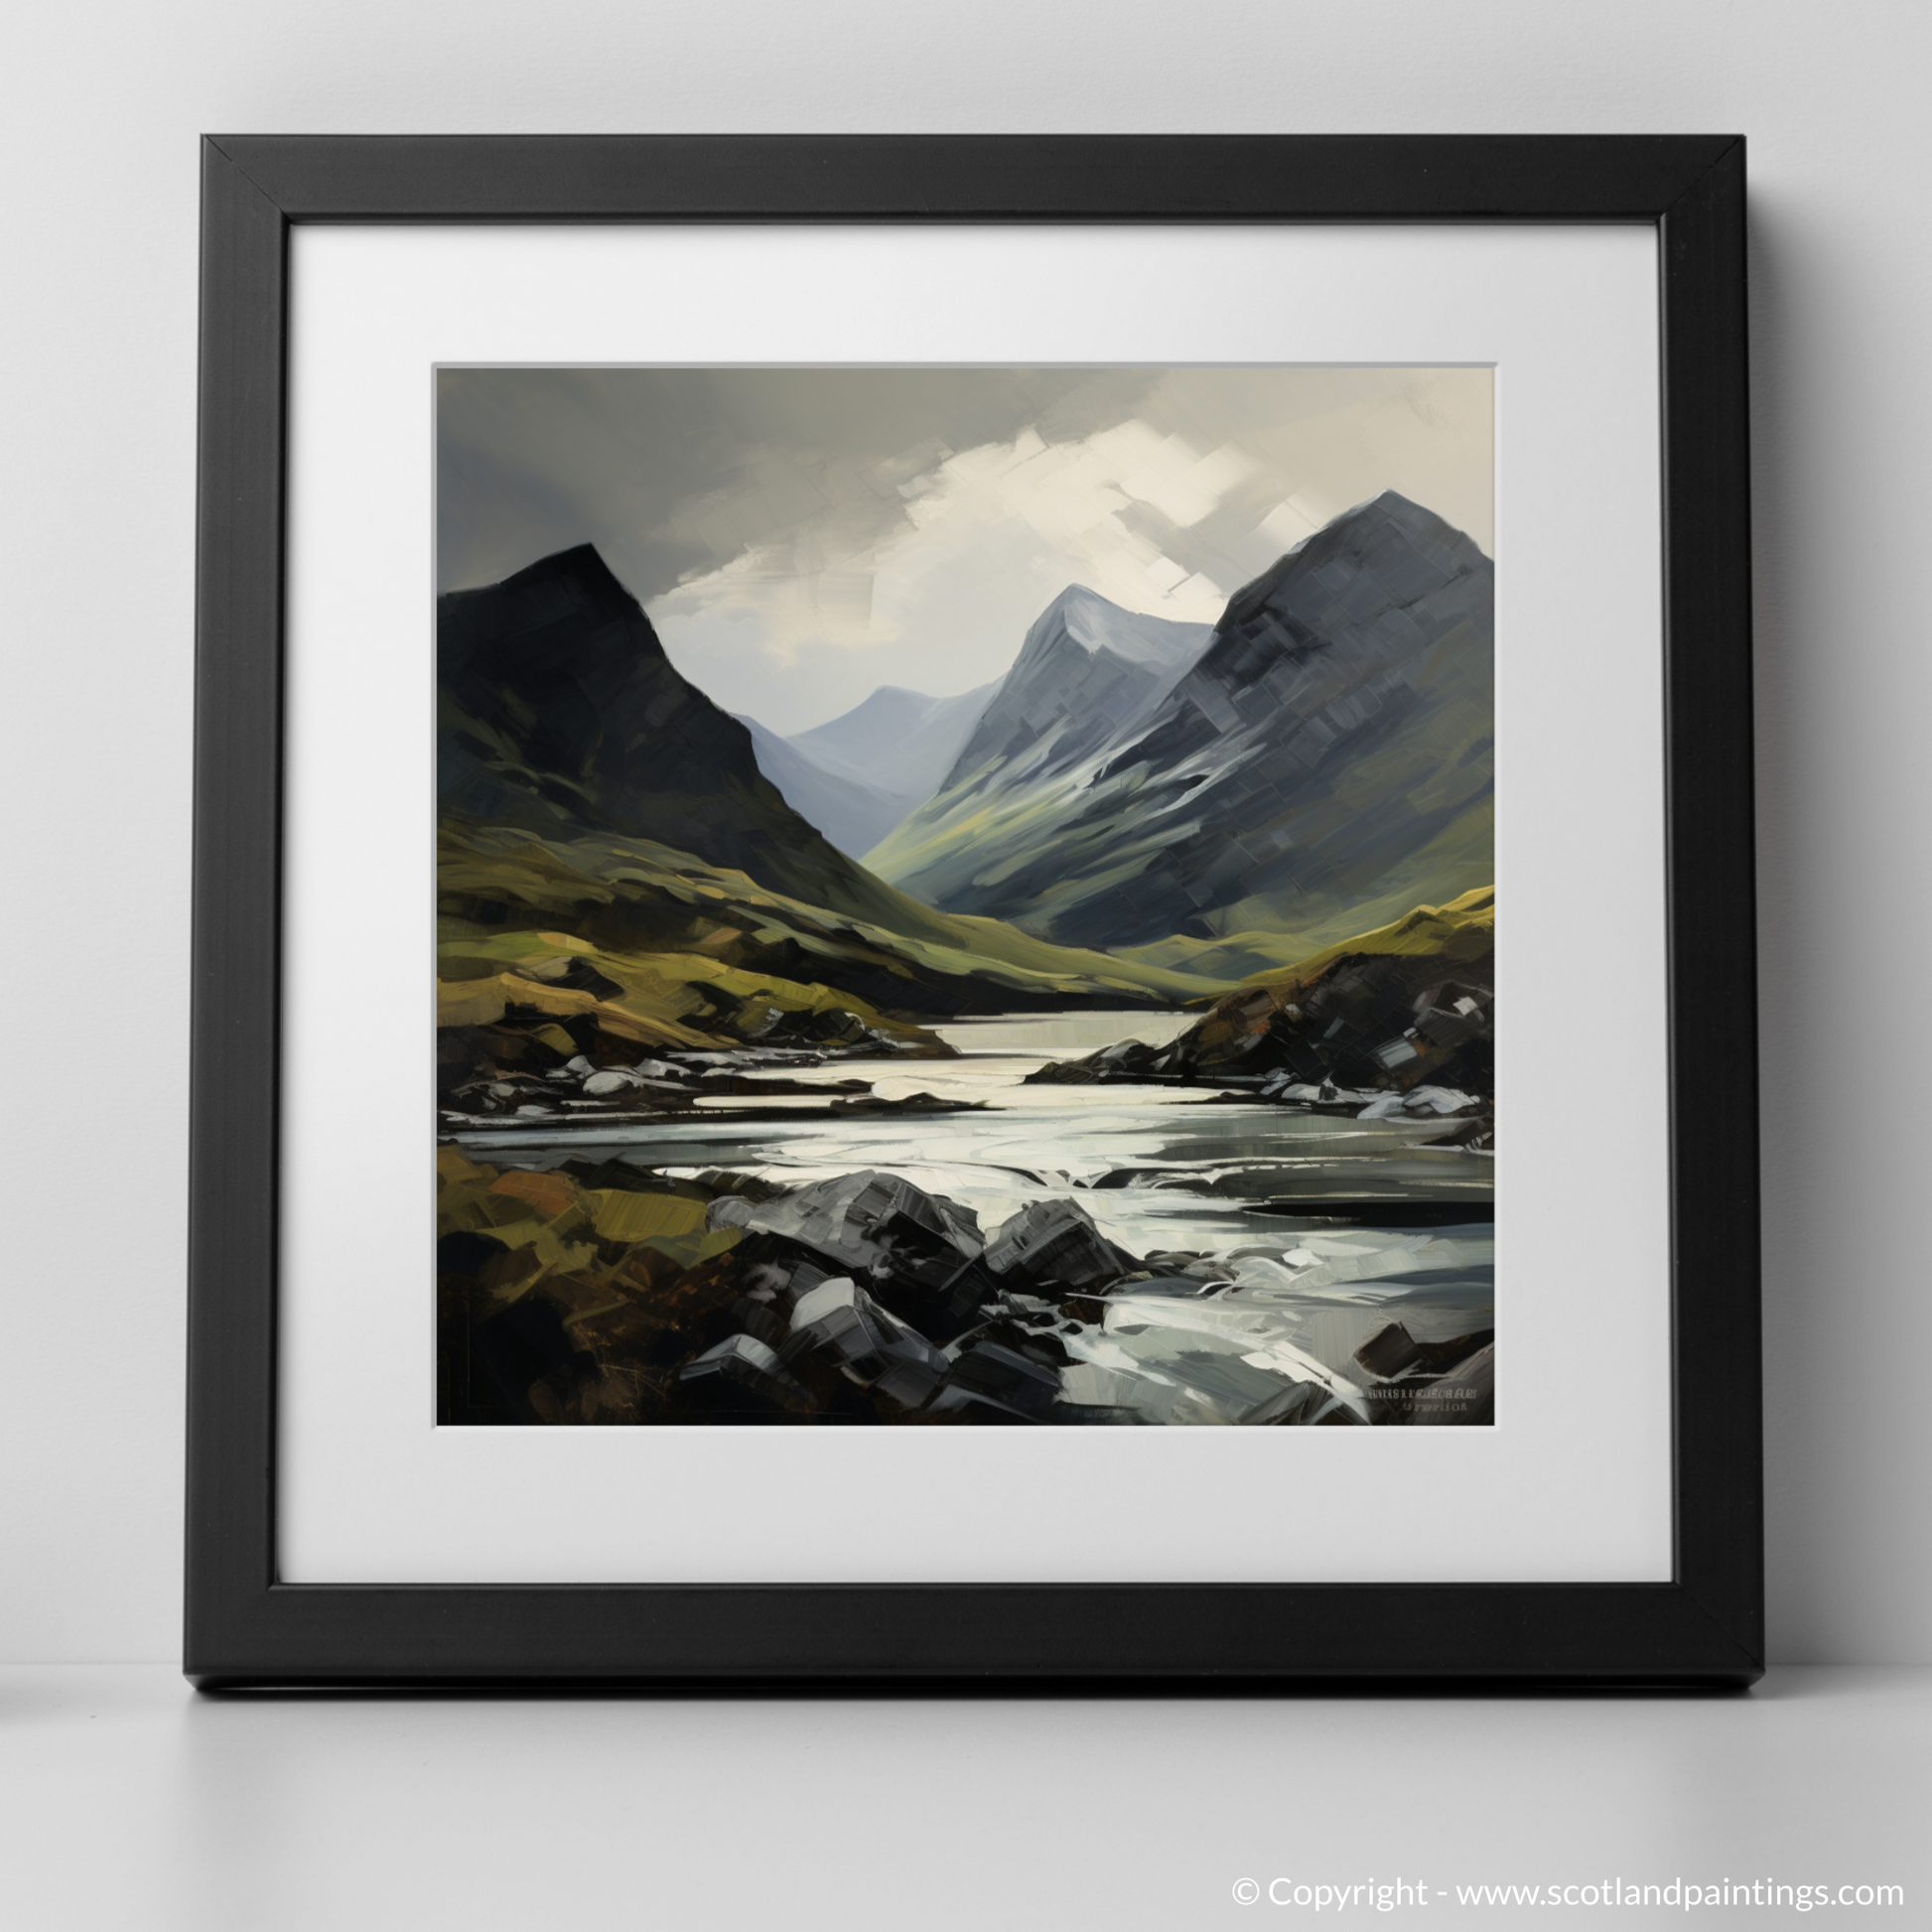 Art Print of Liathach, Wester Ross with a black frame